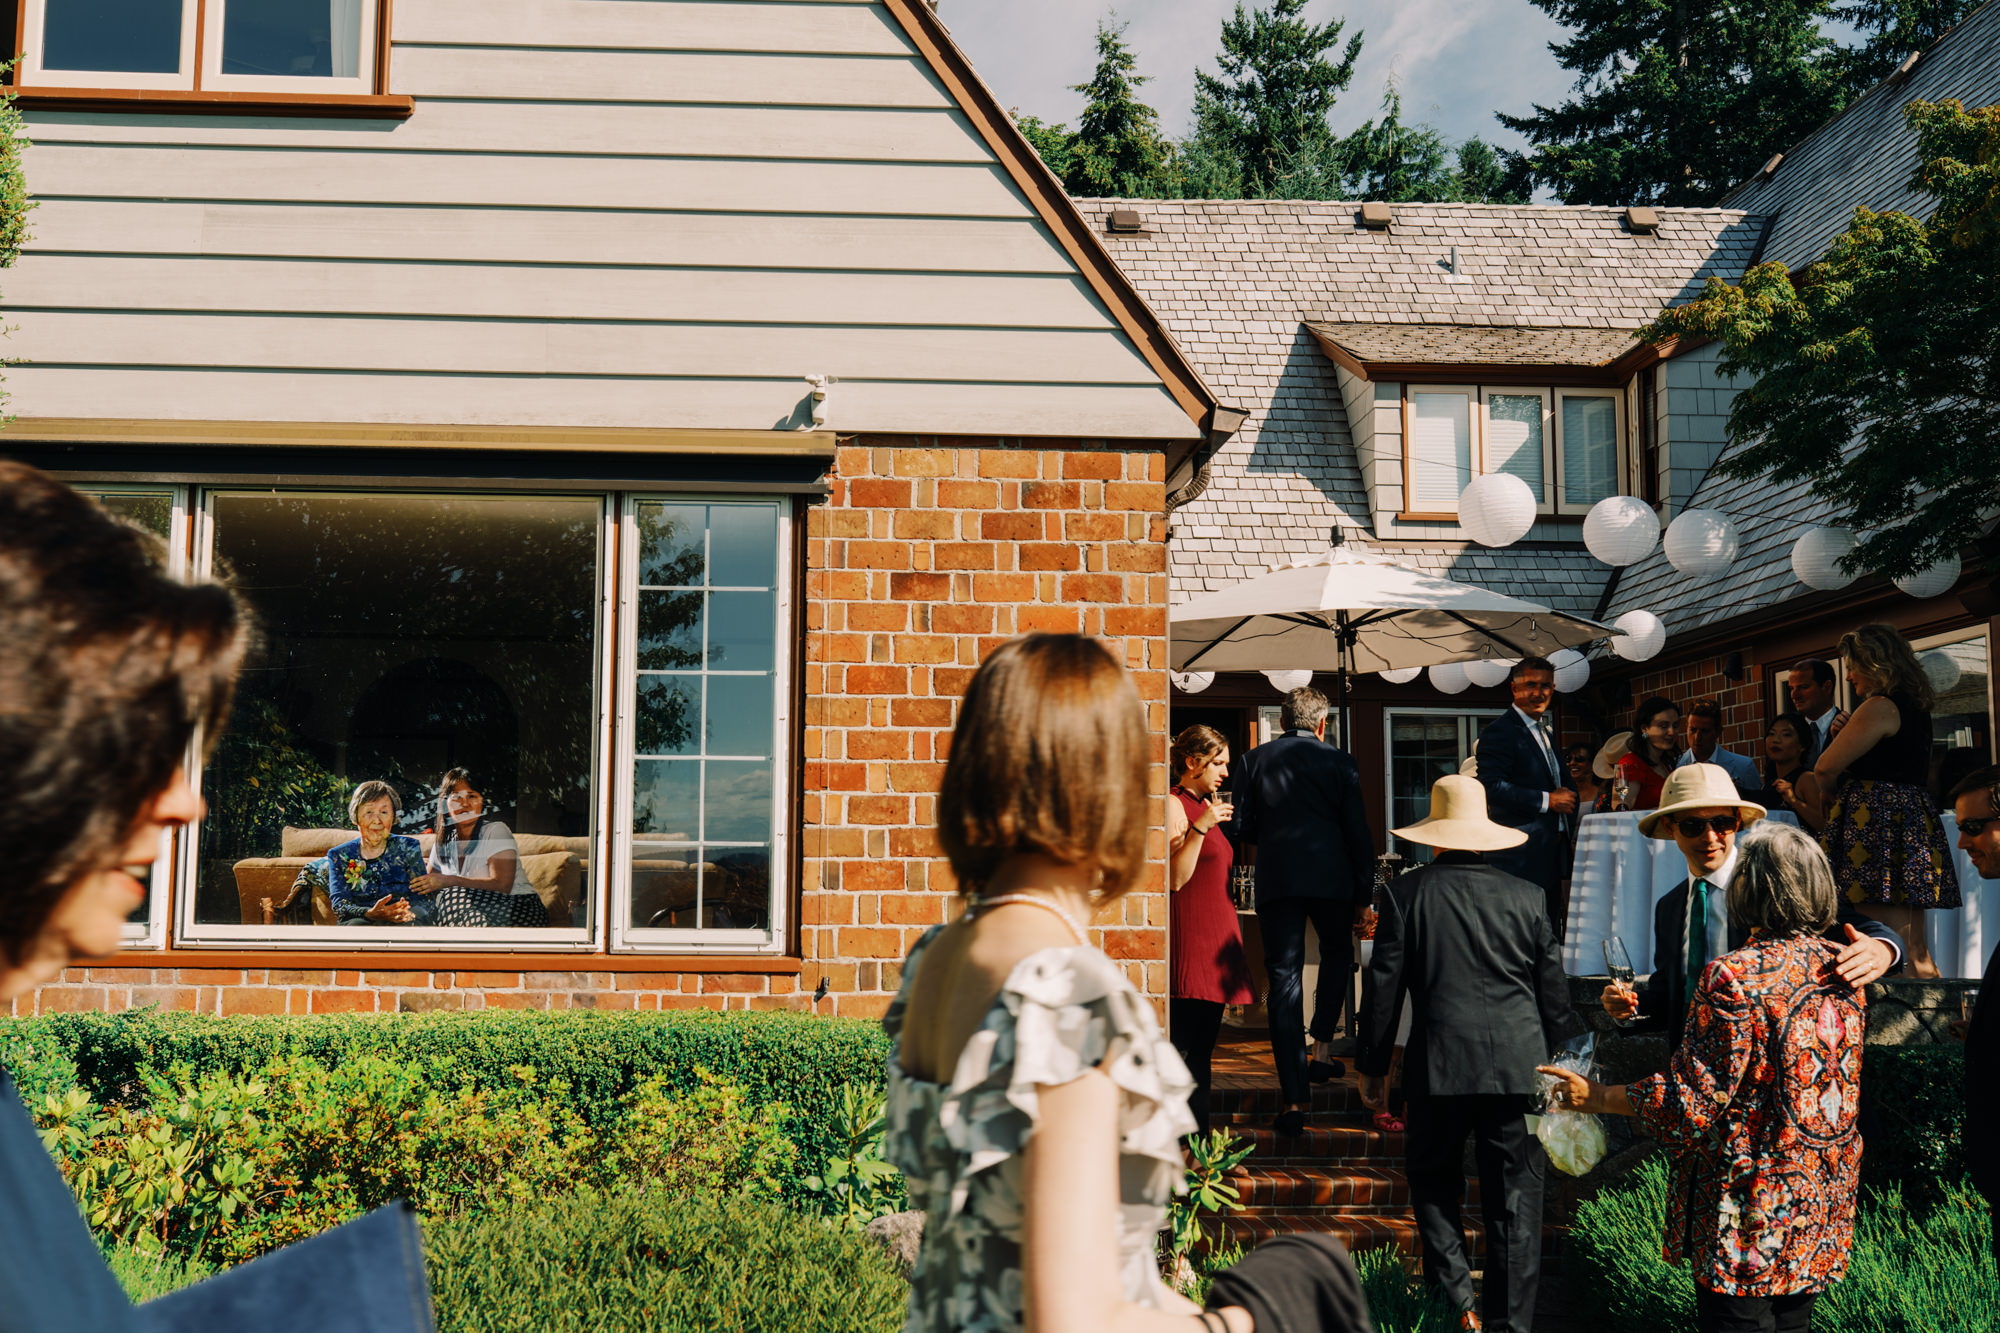 Guests arriving at the Wohns' home with grandma looking on at Jen and Sage's backyard garden wedding.